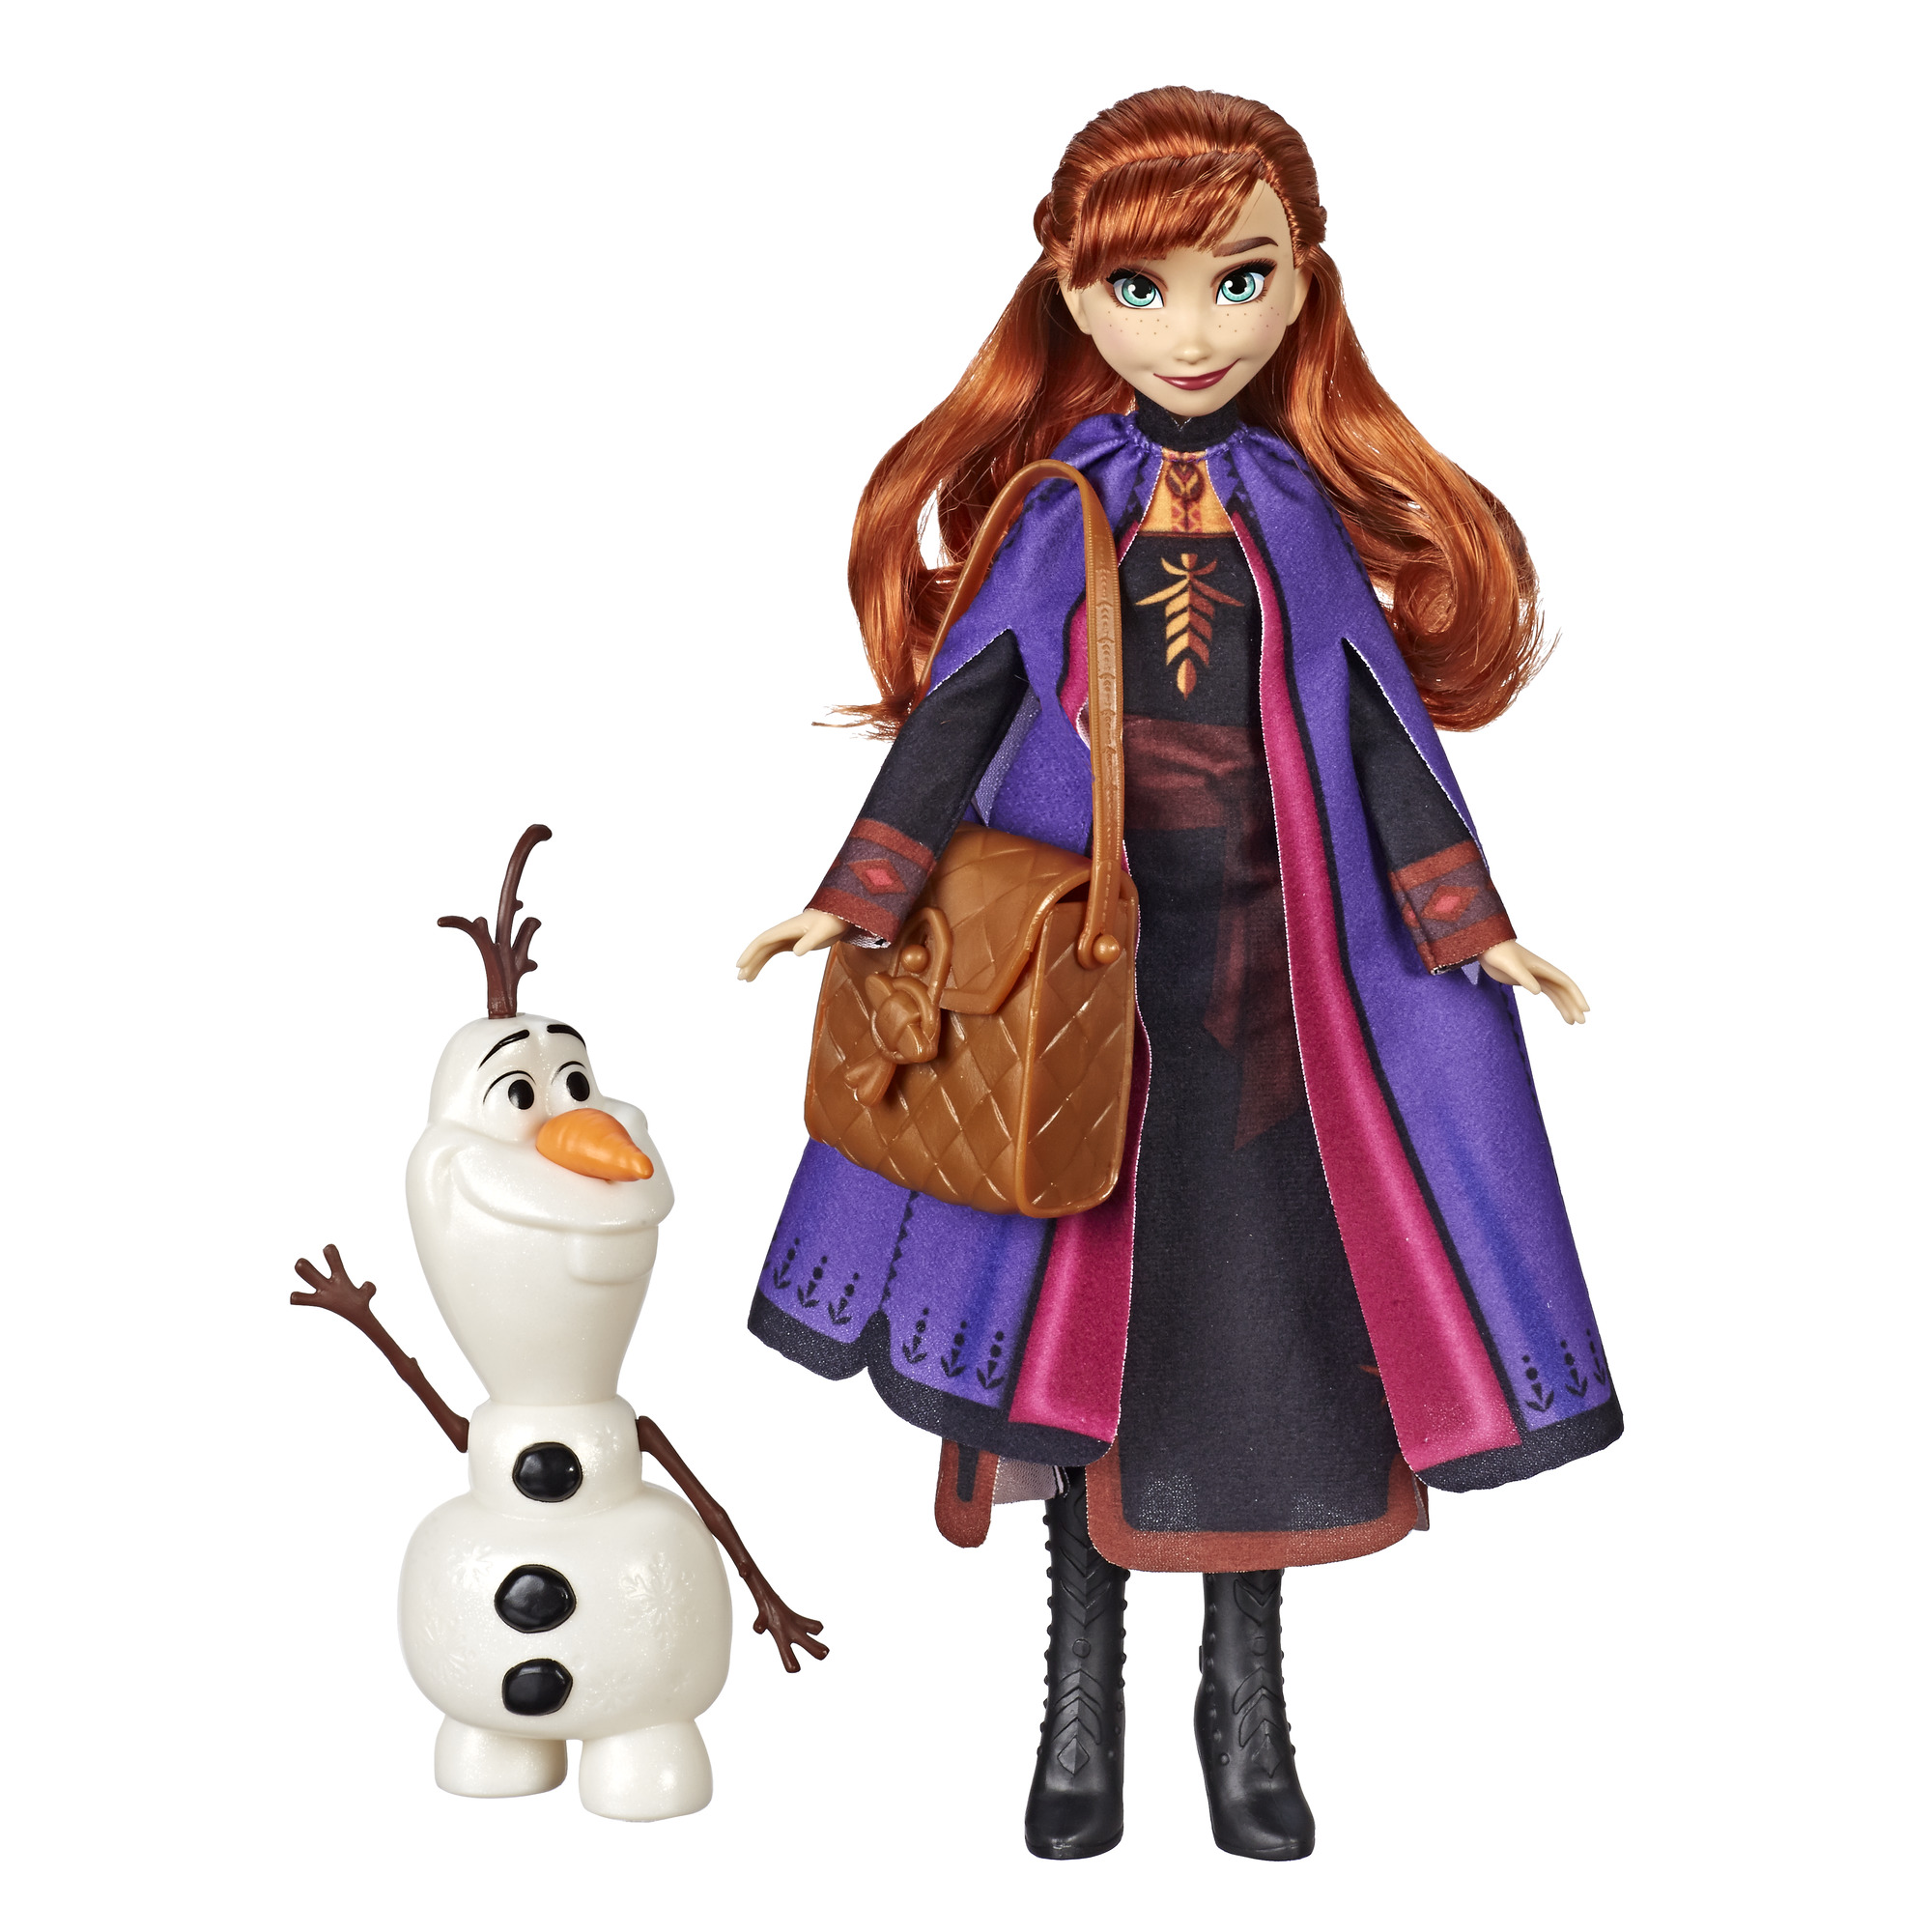 Disney Frozen 2 Anna Fashion Buildable Snowman Olaf Doll Playsets, Includes Doll And Olaf - image 1 of 2